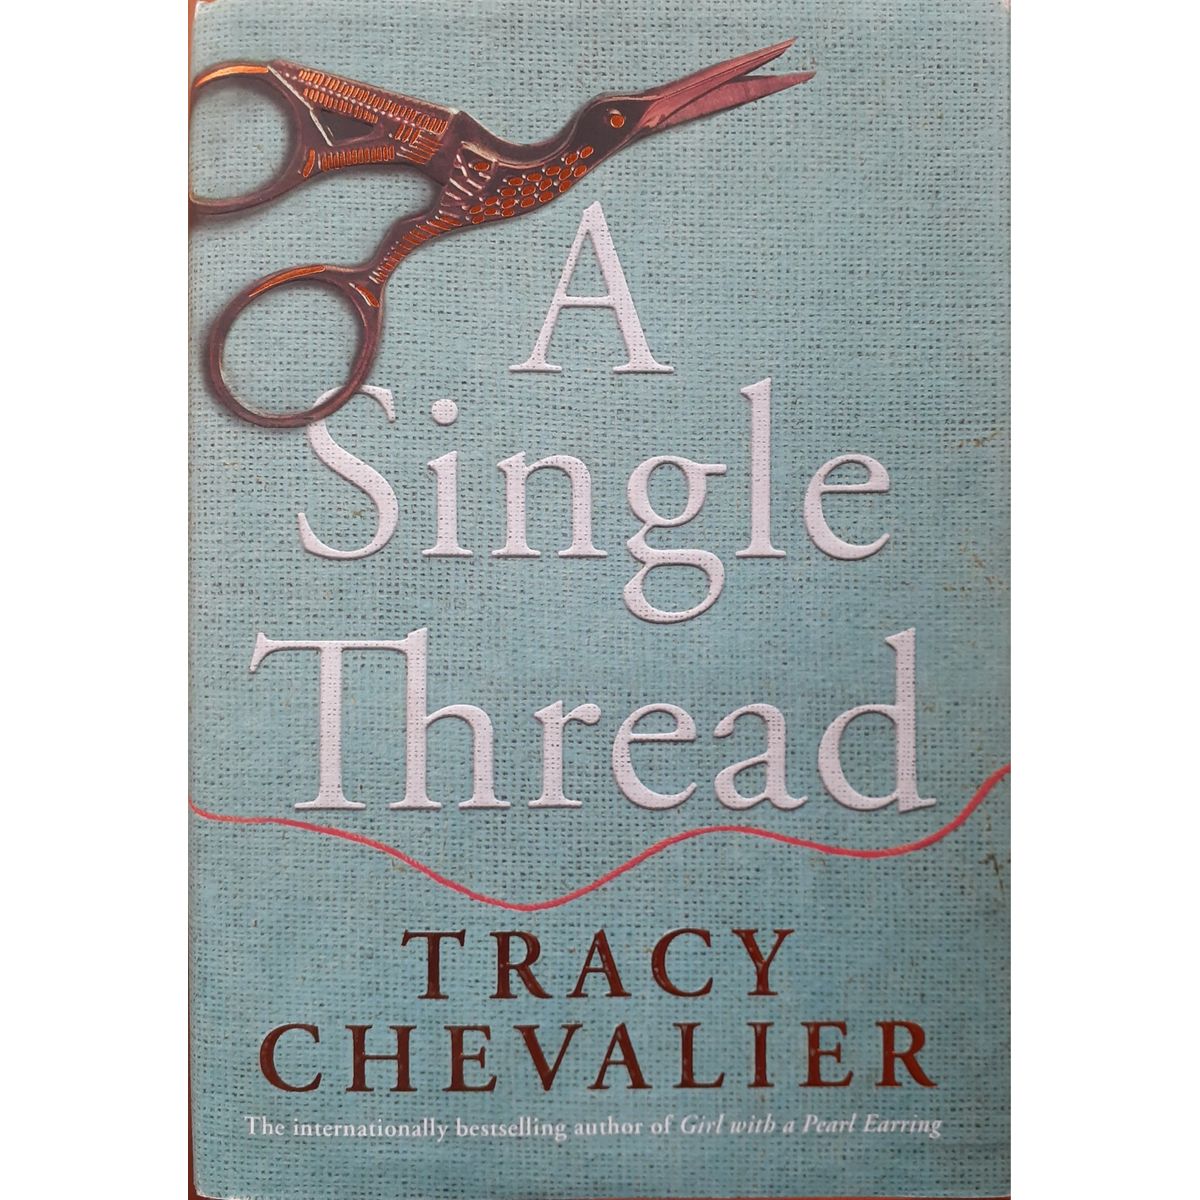 ISBN: 9780008153816 / 0008153817 - A Single Thread by Tracy Chevalier [2019]